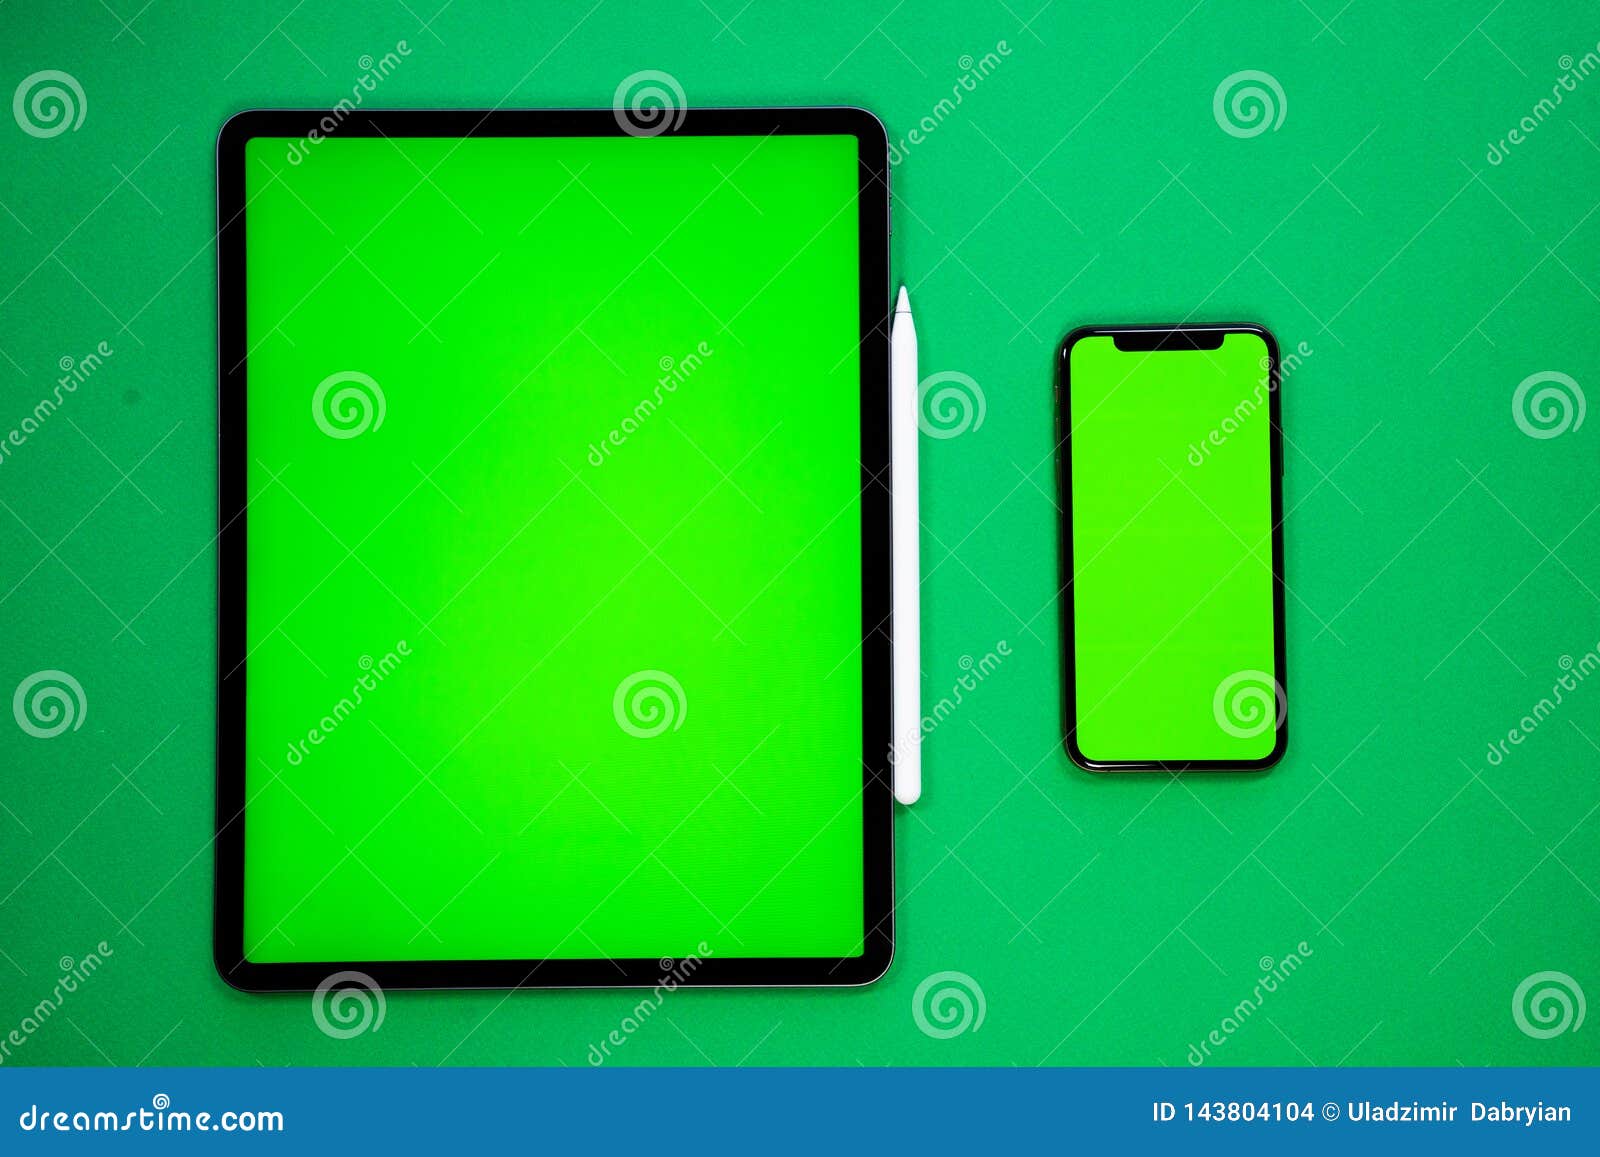 IPad and IPhone, New Tablet on a Green Background with a Pen, and Green  Screen Top View Stock Photo - Image of light, denim: 143804104